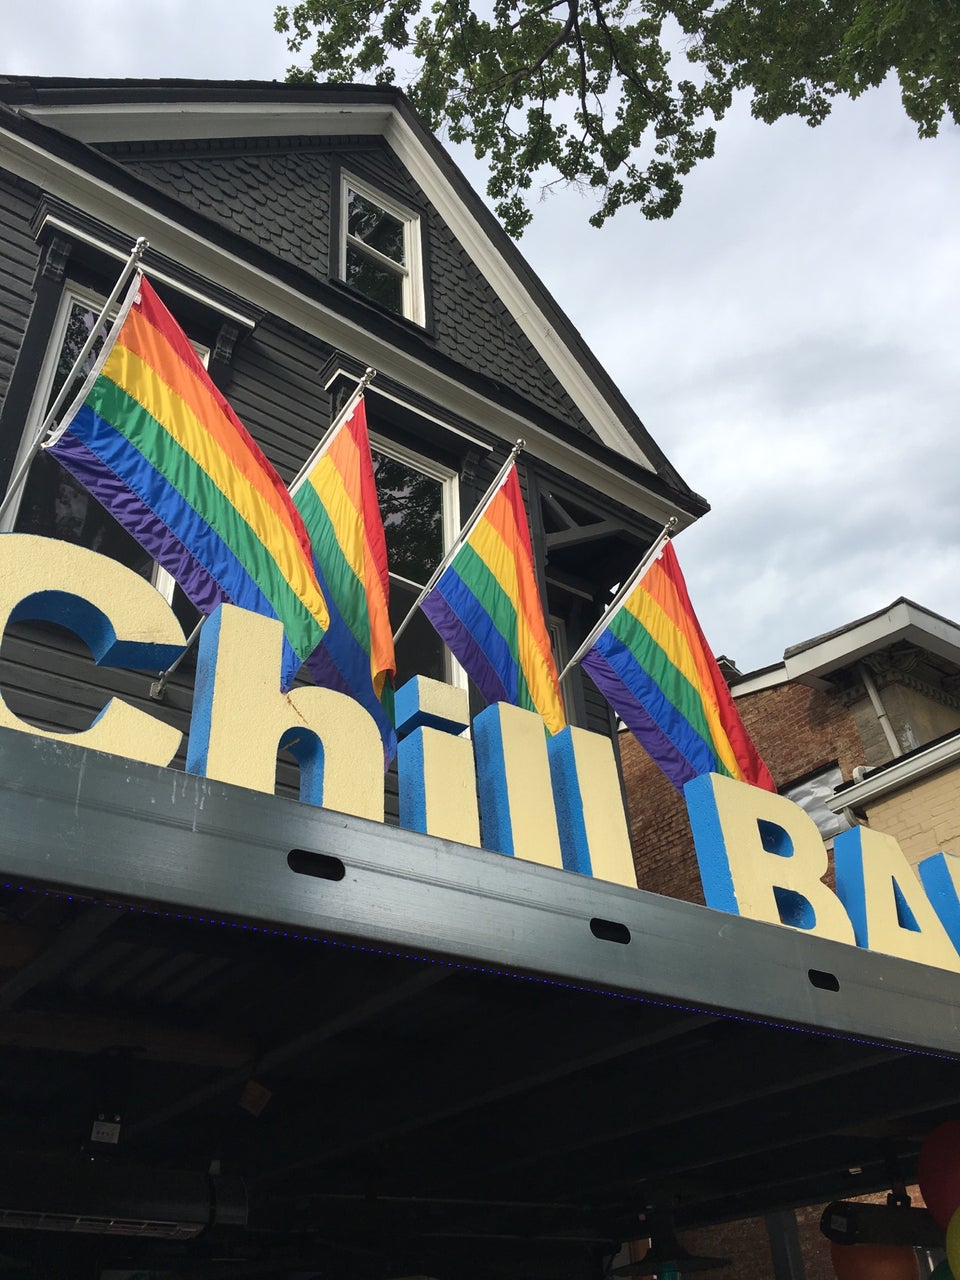 Photo of Chill Bar Highlands